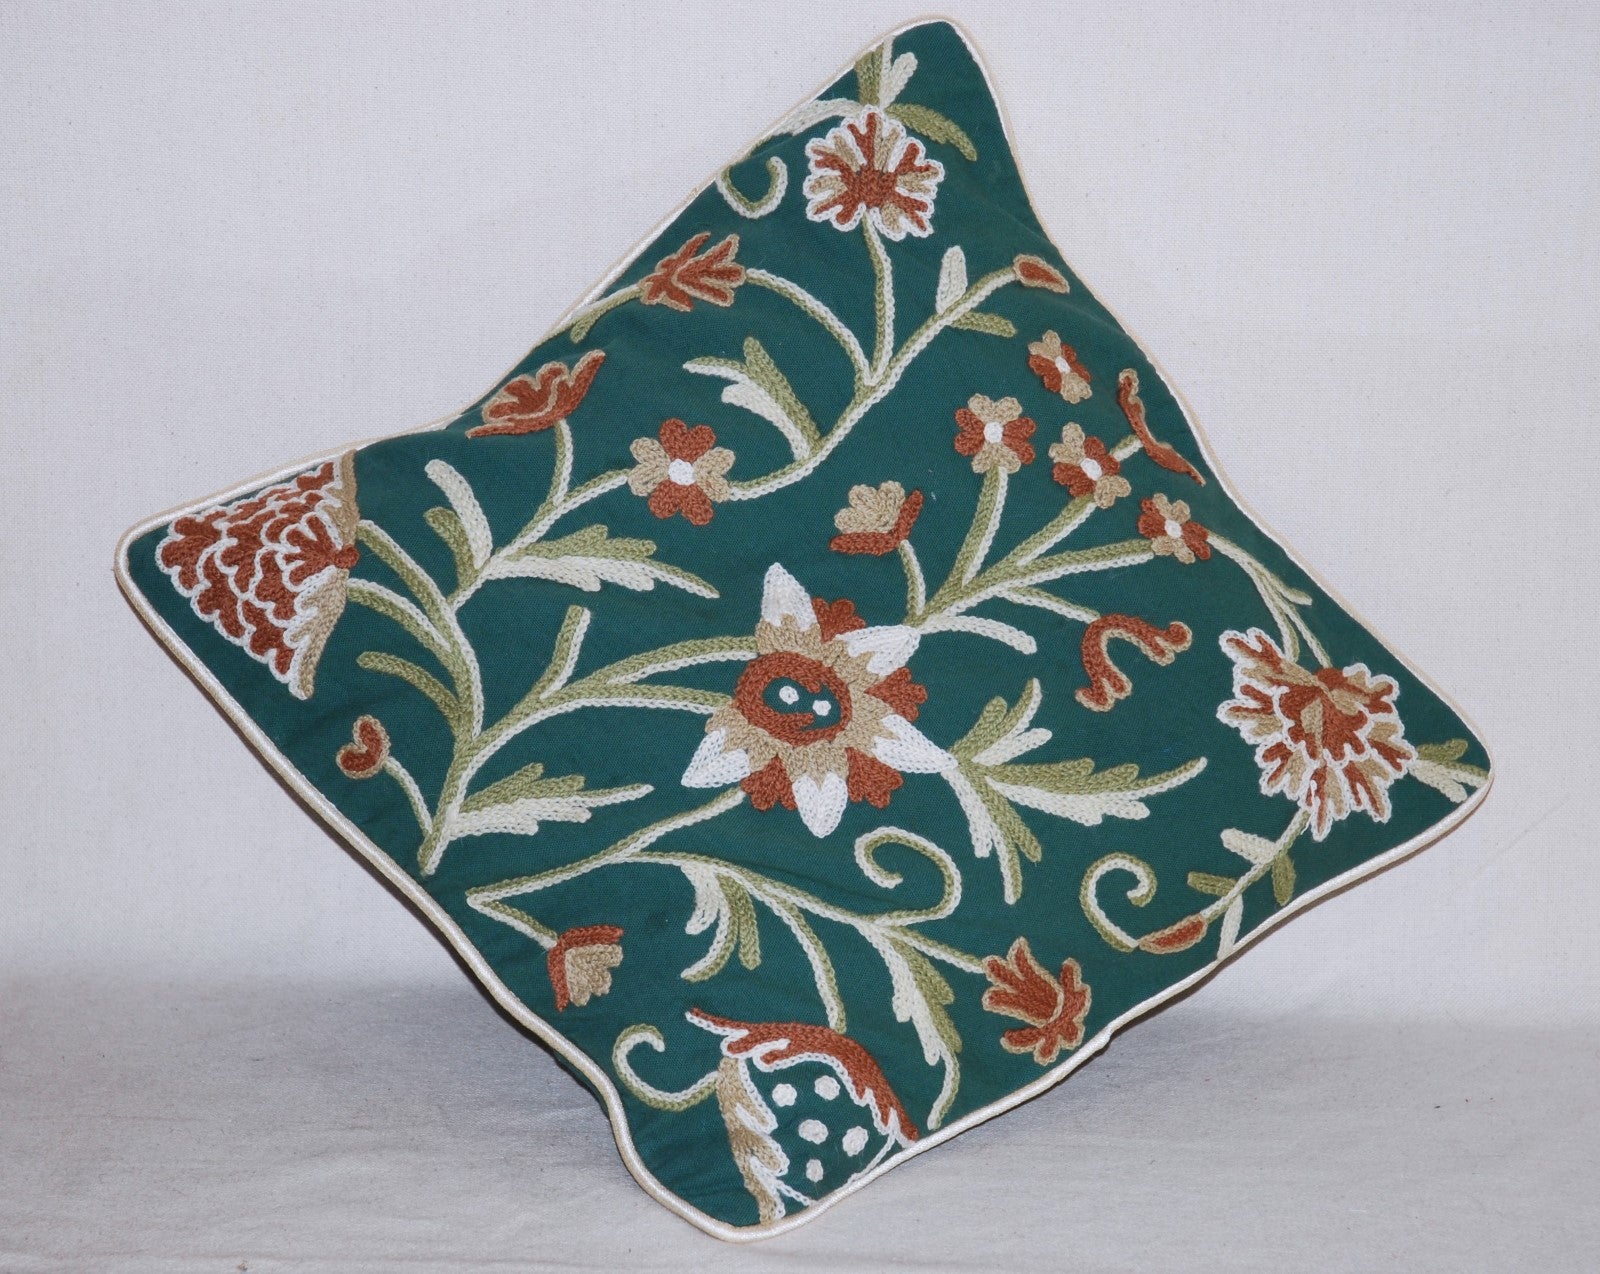 Crewel Embroidery Throw Pillowcase, Cushion Cover Multicolor on Green #CW436